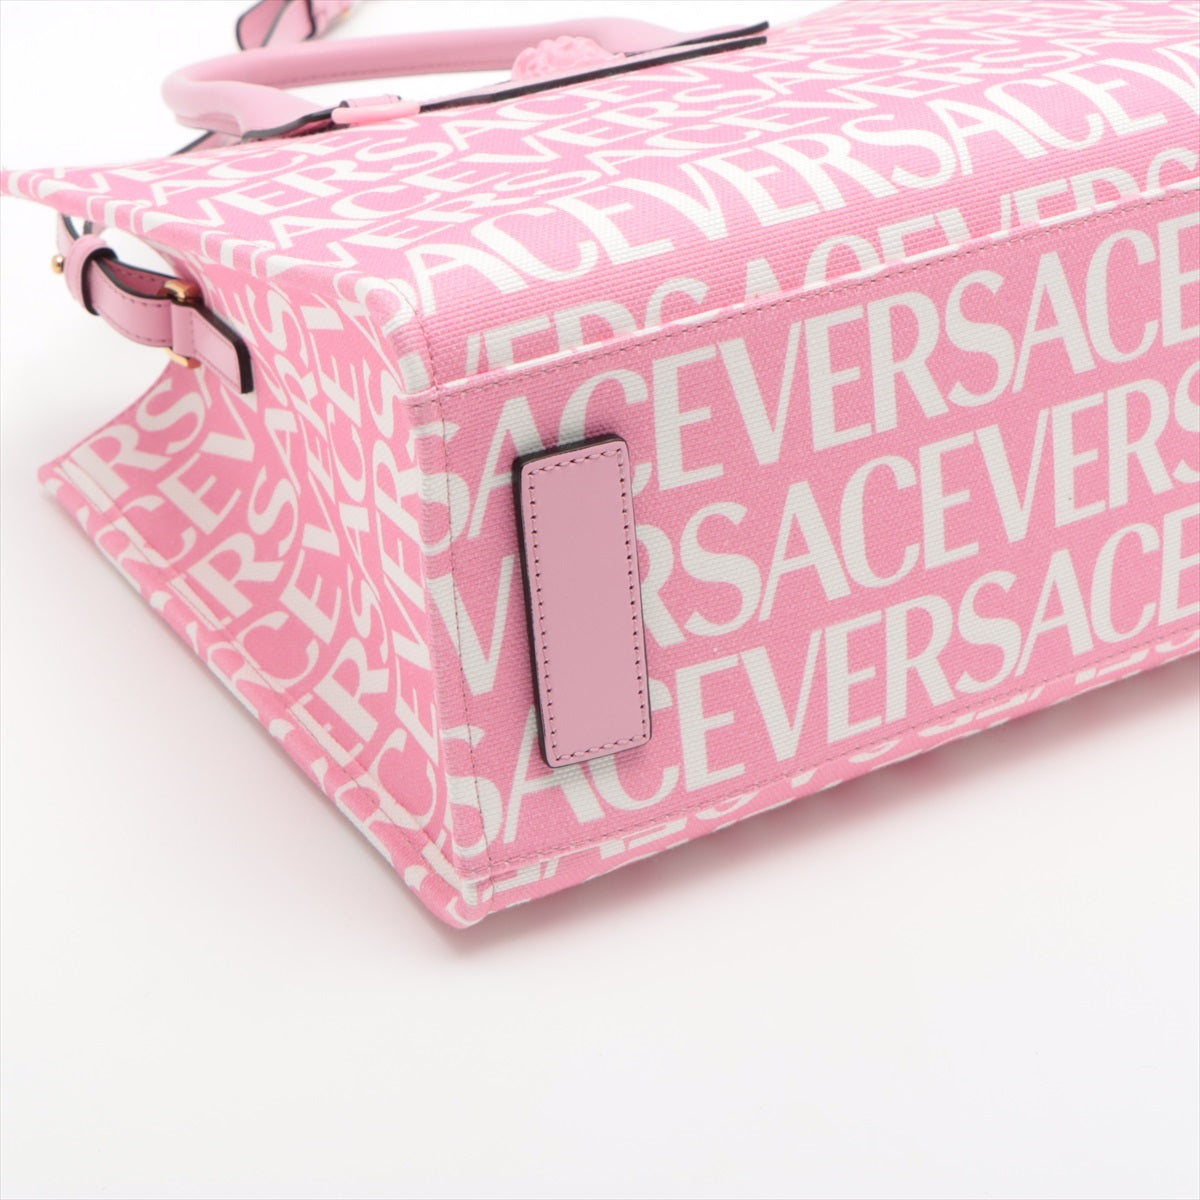 VERSACE All Over Canvas & leather 2 way tote bag Pink